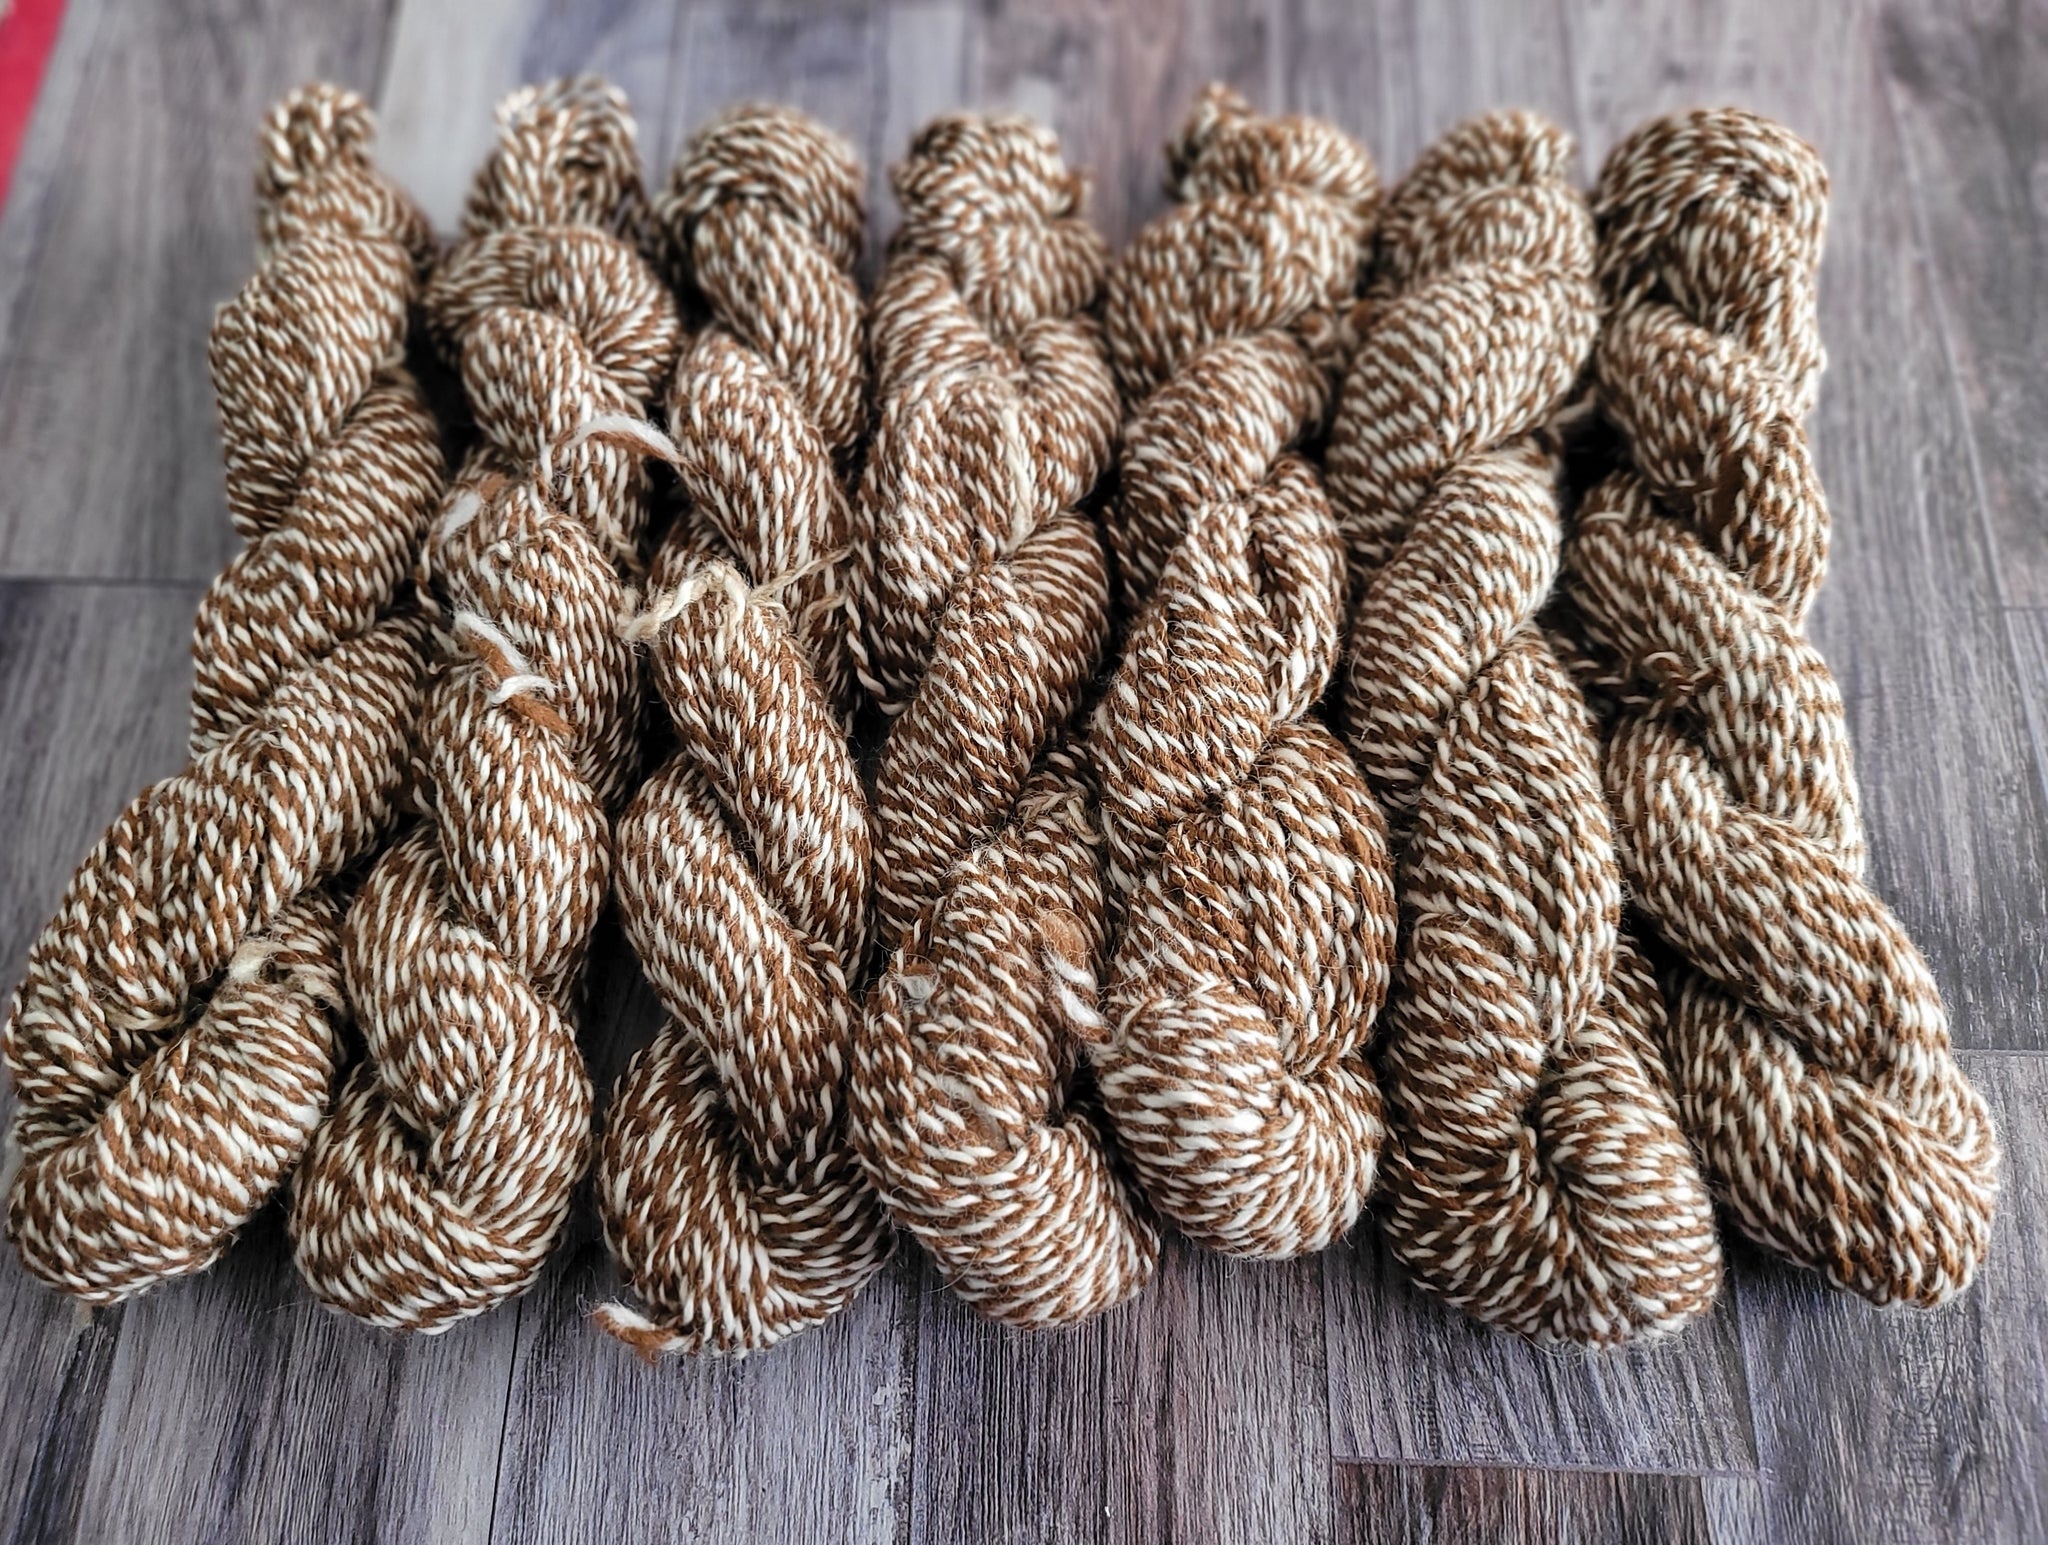 Brown/Beige Marled - Alpacalyptic - Worsted weight - 2 ply - locally sourced & milled